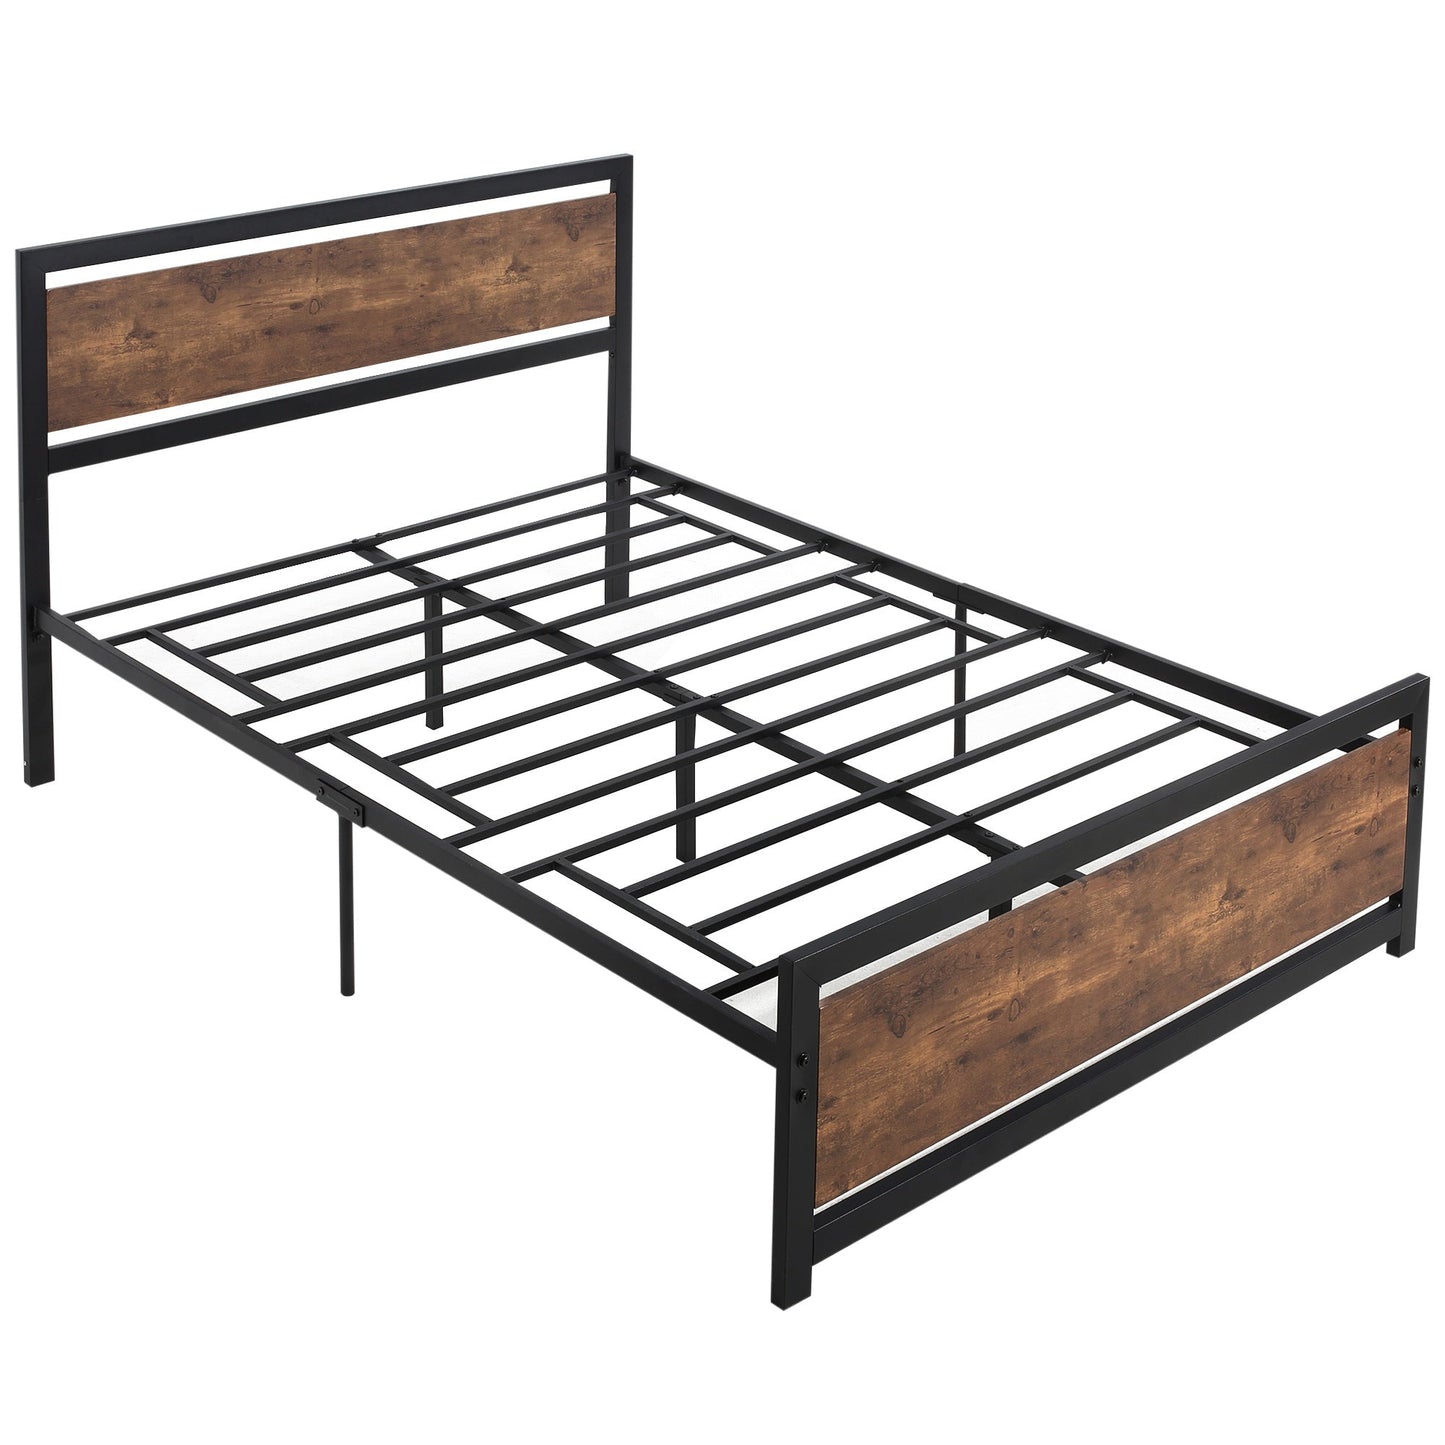 HOMCOM Double Size Metal Bed Frame with Headboard & Footboard, Strong Slat Support Full Bed Frame w/ Underbed Storage Space, Bedroom Furniture For Adults